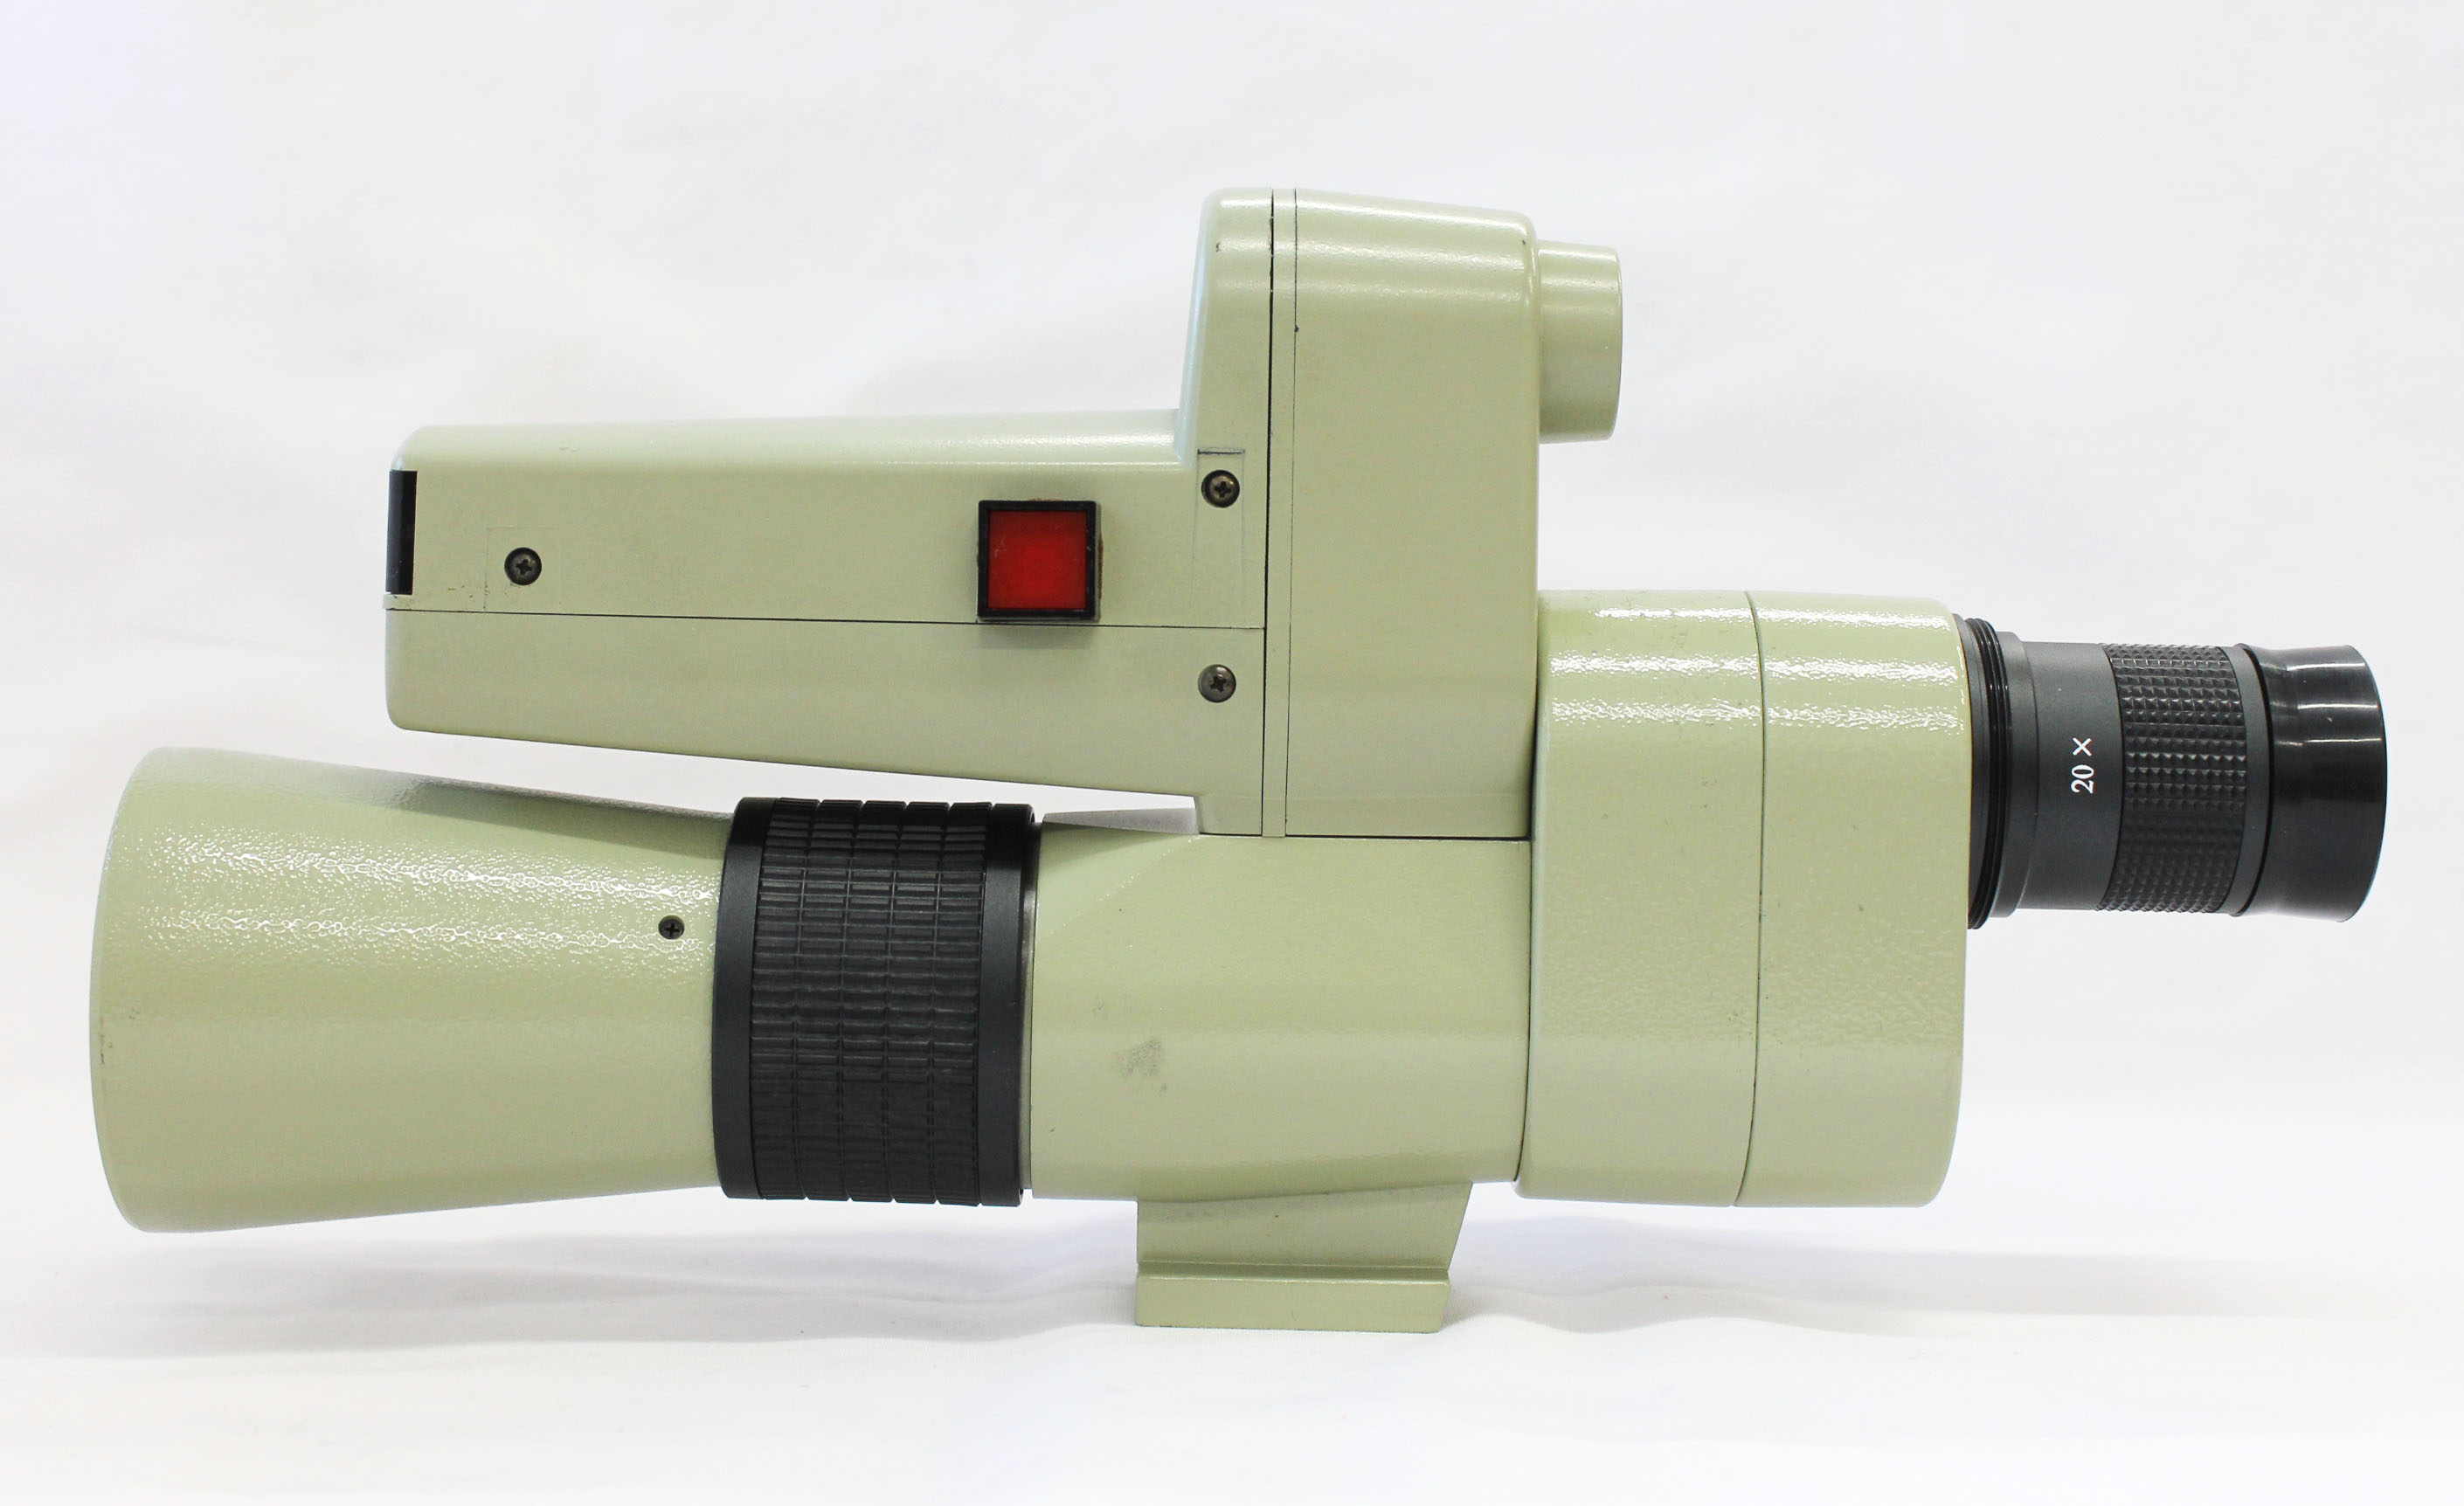 Kenko Find Scope Spotting Scope 20x D=56.5 with LED Aiming View Finder in Case / Box from Japan Photo 2